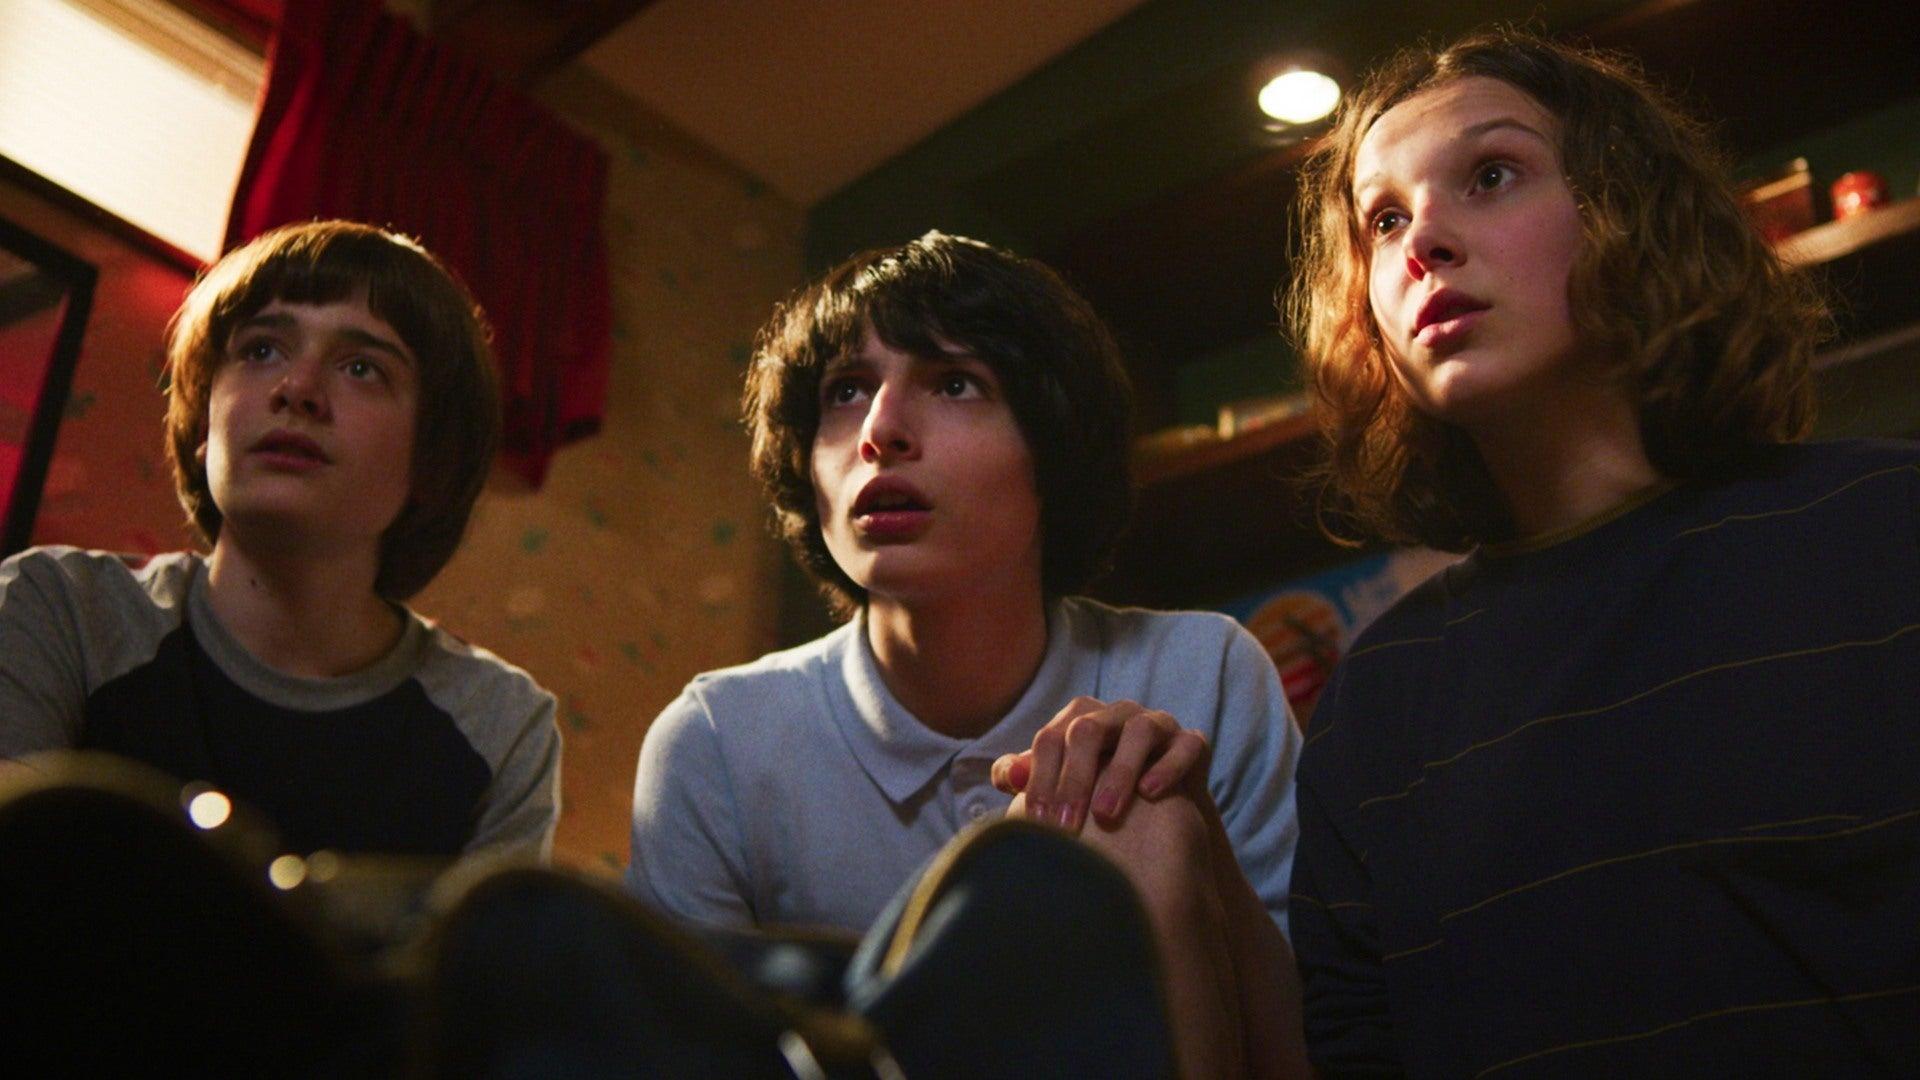 Stranger Things Season 3 Ending Explained: Will There Be a Season